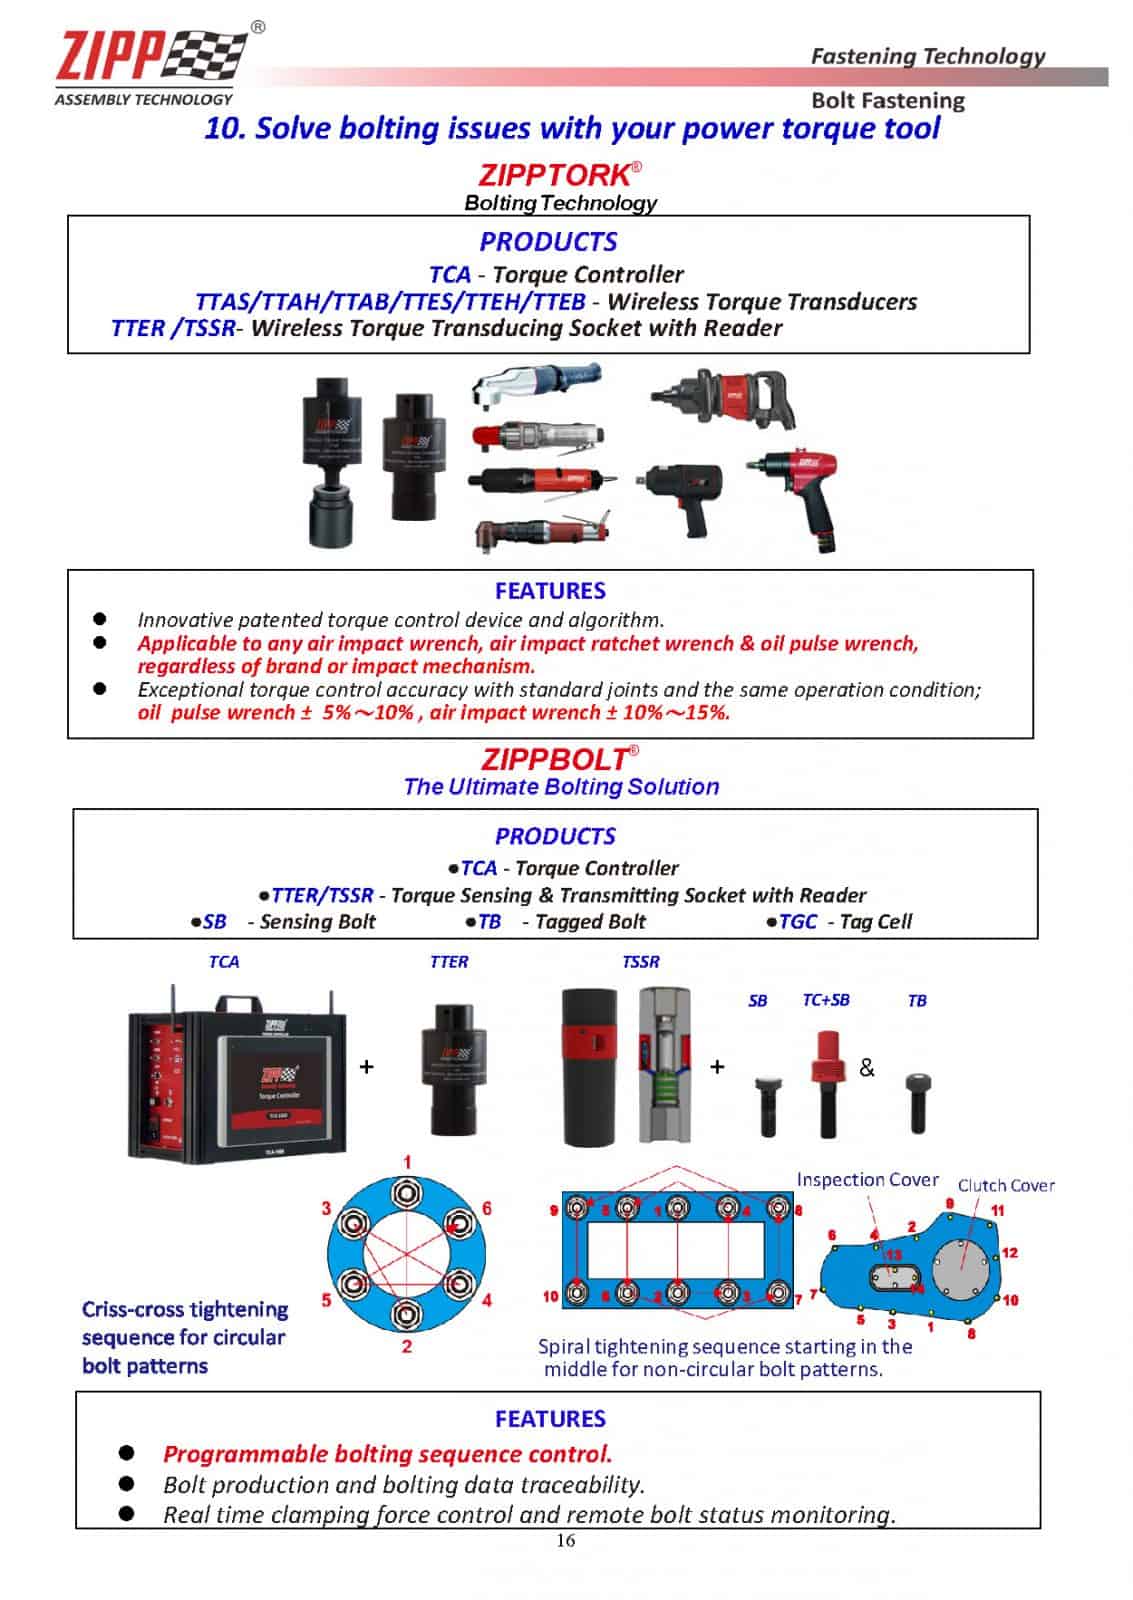 China Pneumatic Corporation (CPC) – ISO certified tool manufacturer & supplier from Taiwan